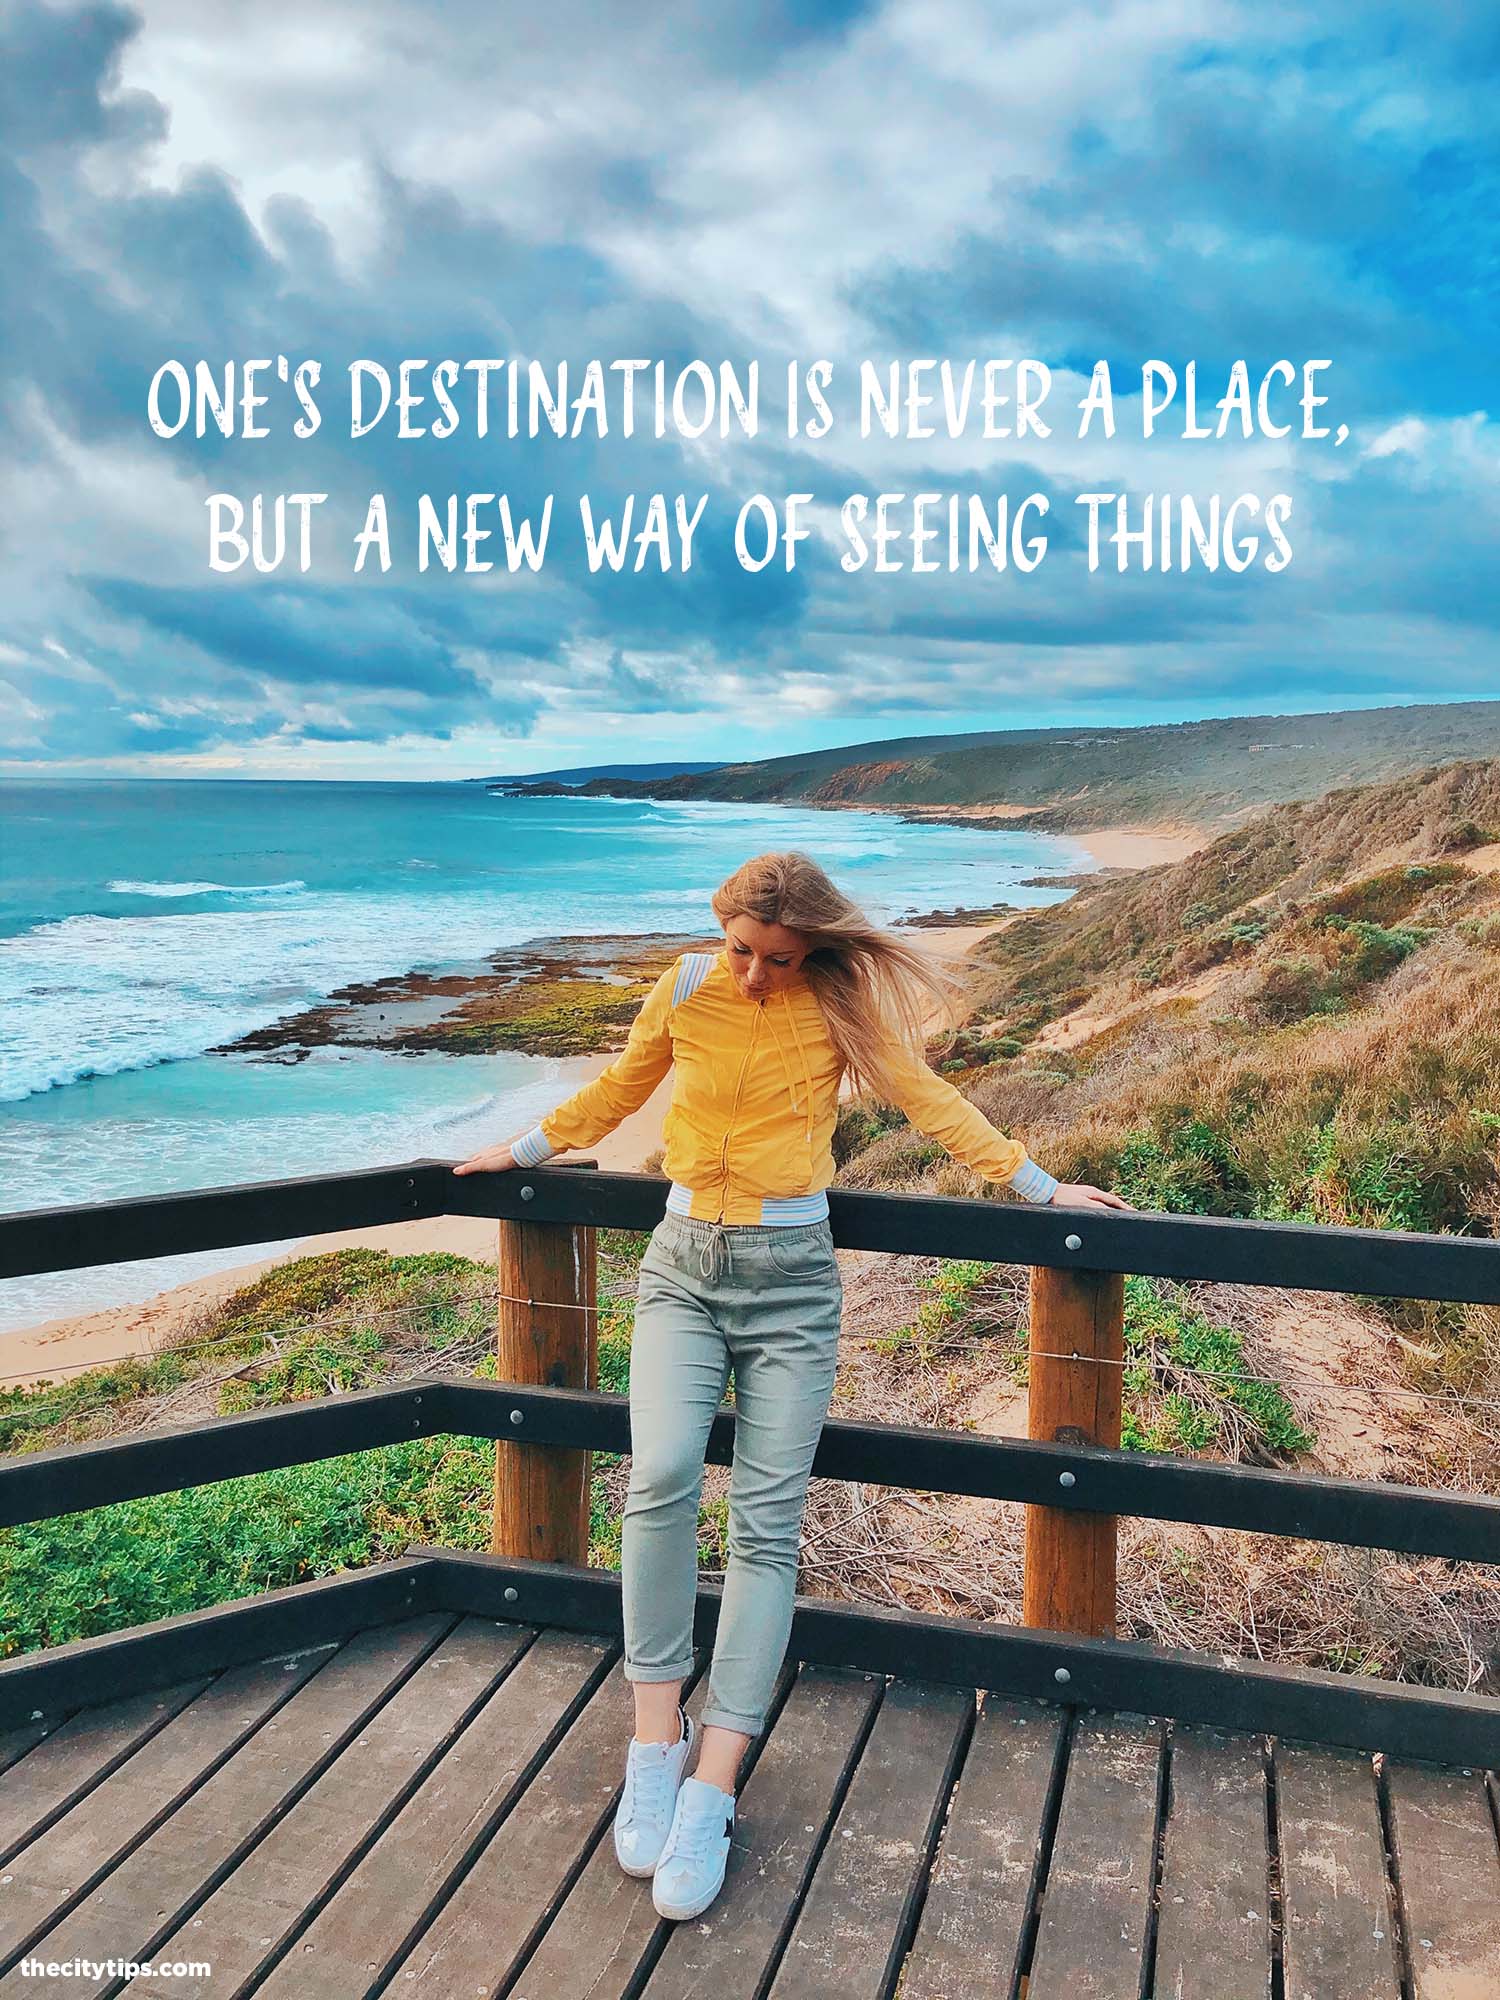 "One's destination is never a place, but a new way of seeing things." by Henry Miller